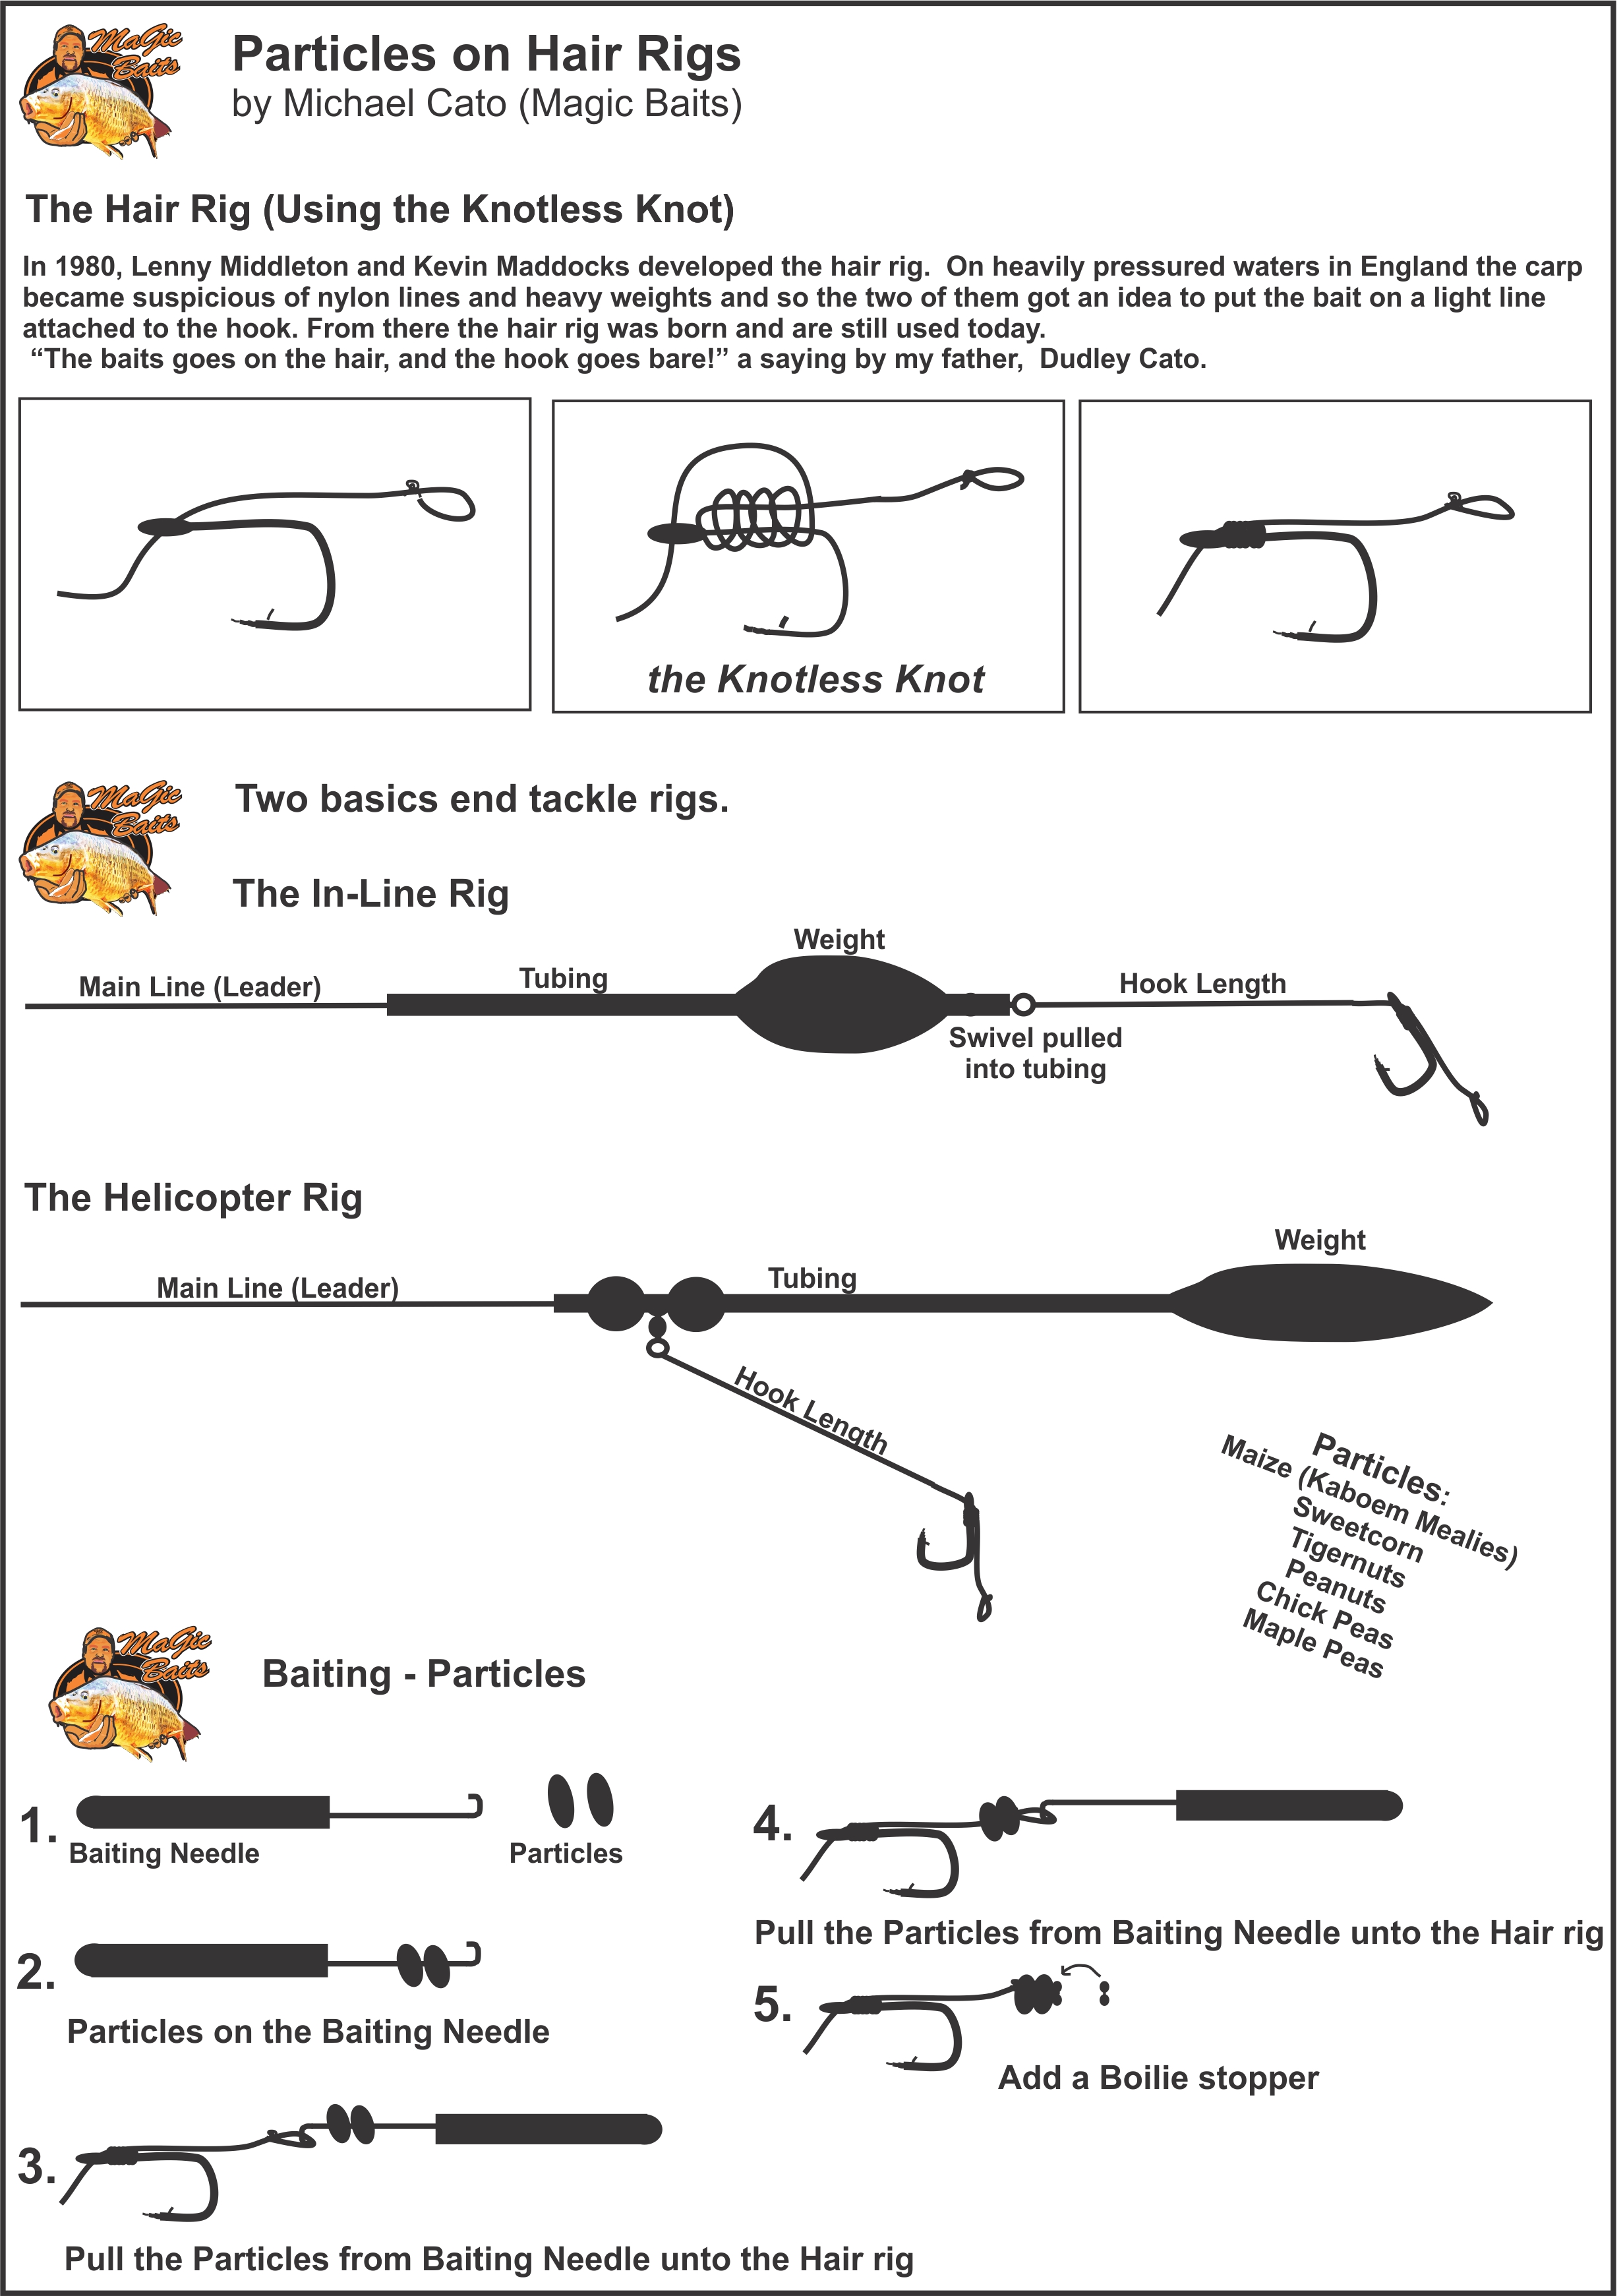 https://www.magicbaits.co.za/images/article-images/techniques/rigs/Particle%20Fishing%20with%20Hair%20Rigs.jpg